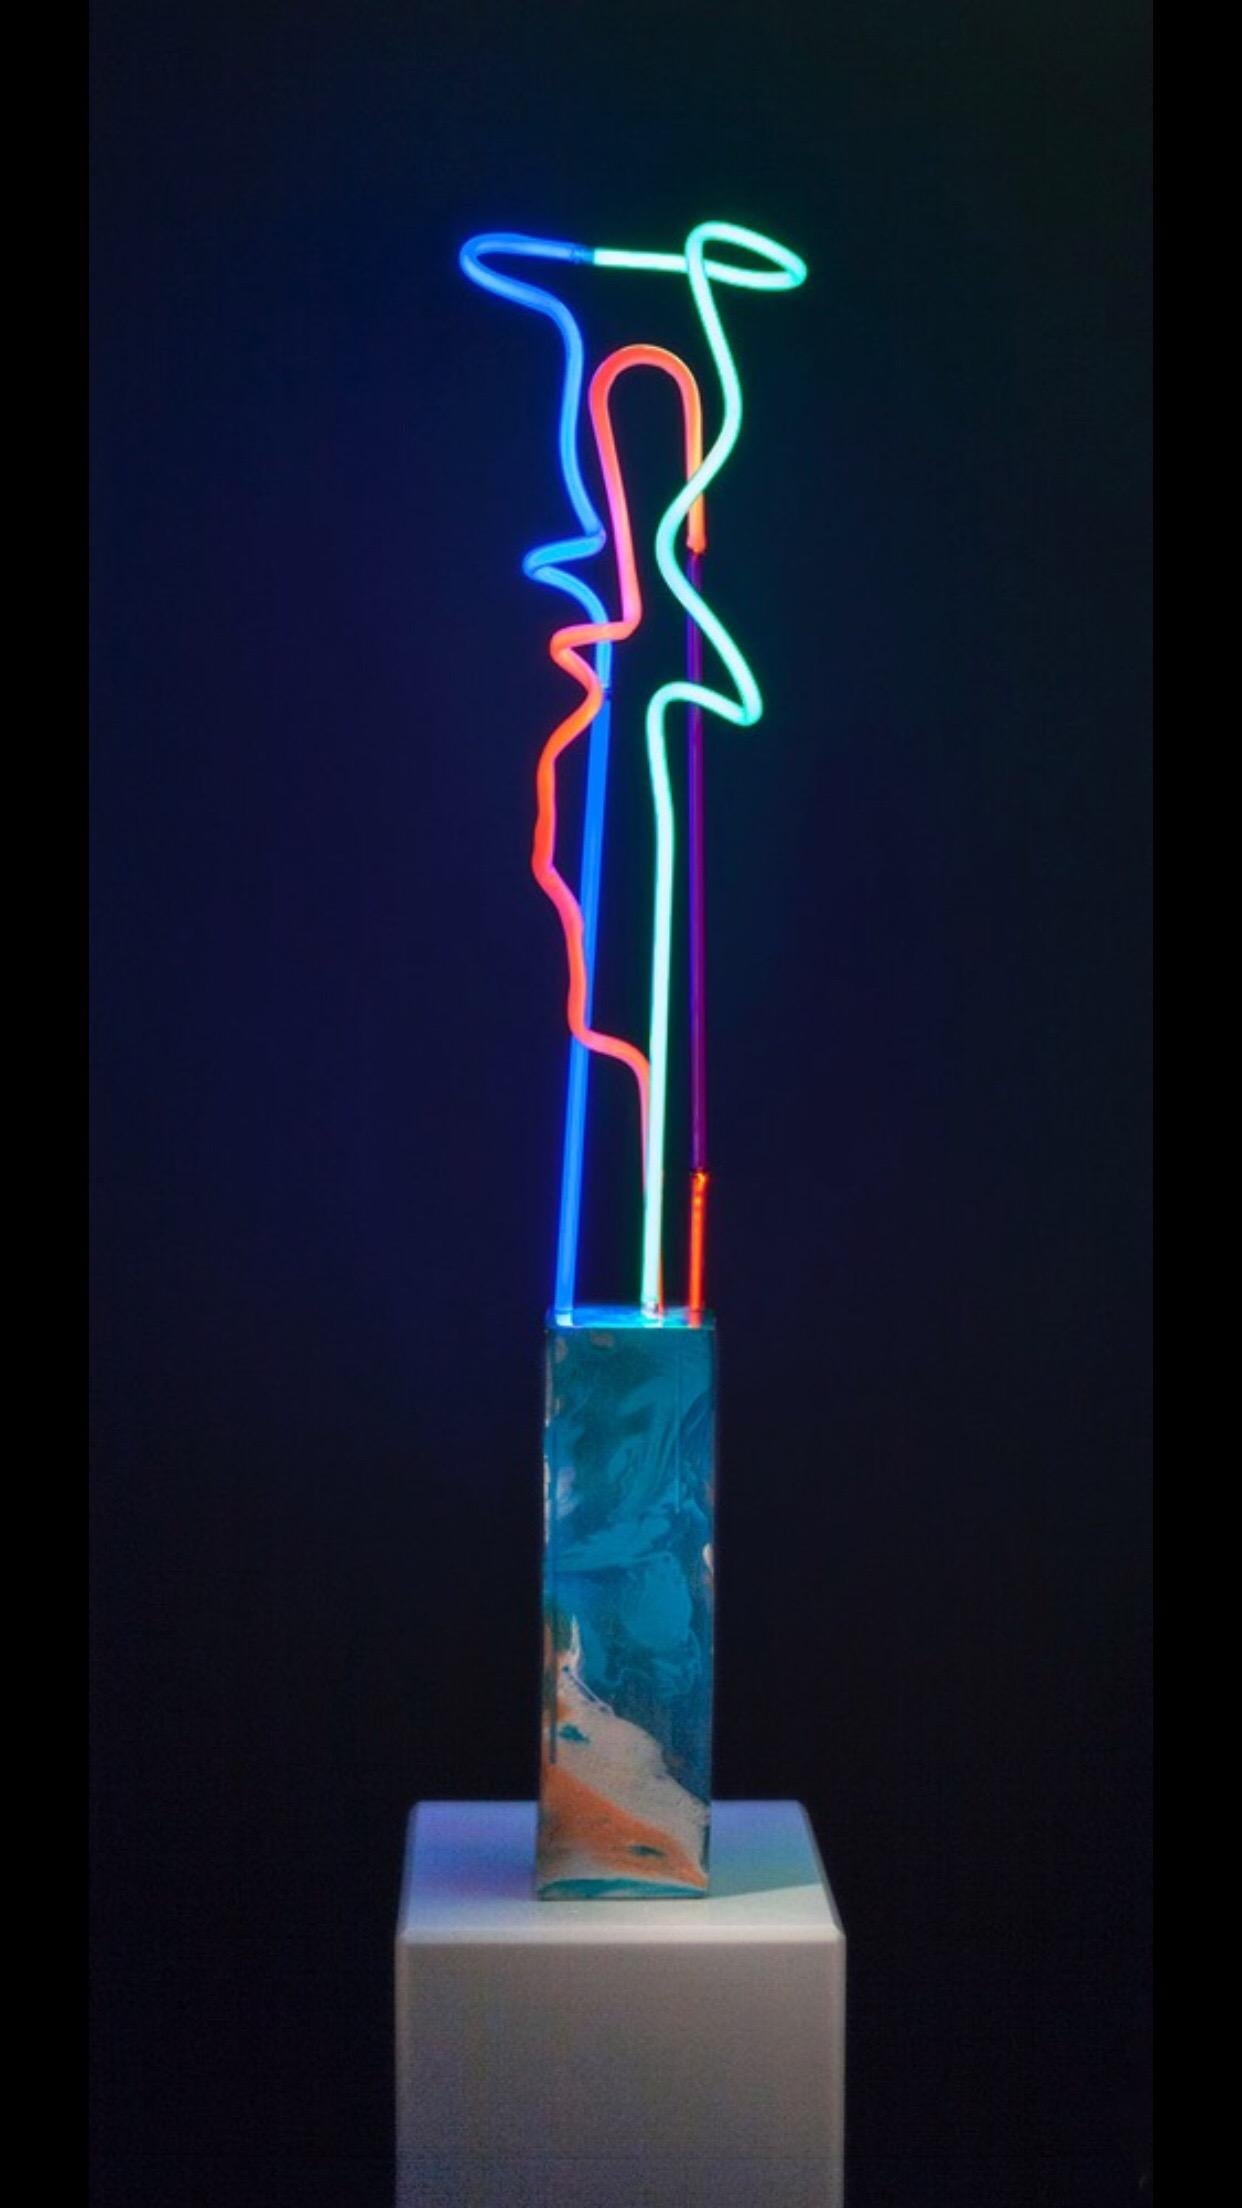 3-Dimensional organic neon sculptures focusing on shape, balance and proportion. Creating a variety of sizes and colors, using an age old medium in a modern way, combining chemistry and alchemy, beckoning the spirit of Nikola Tesla's vision of